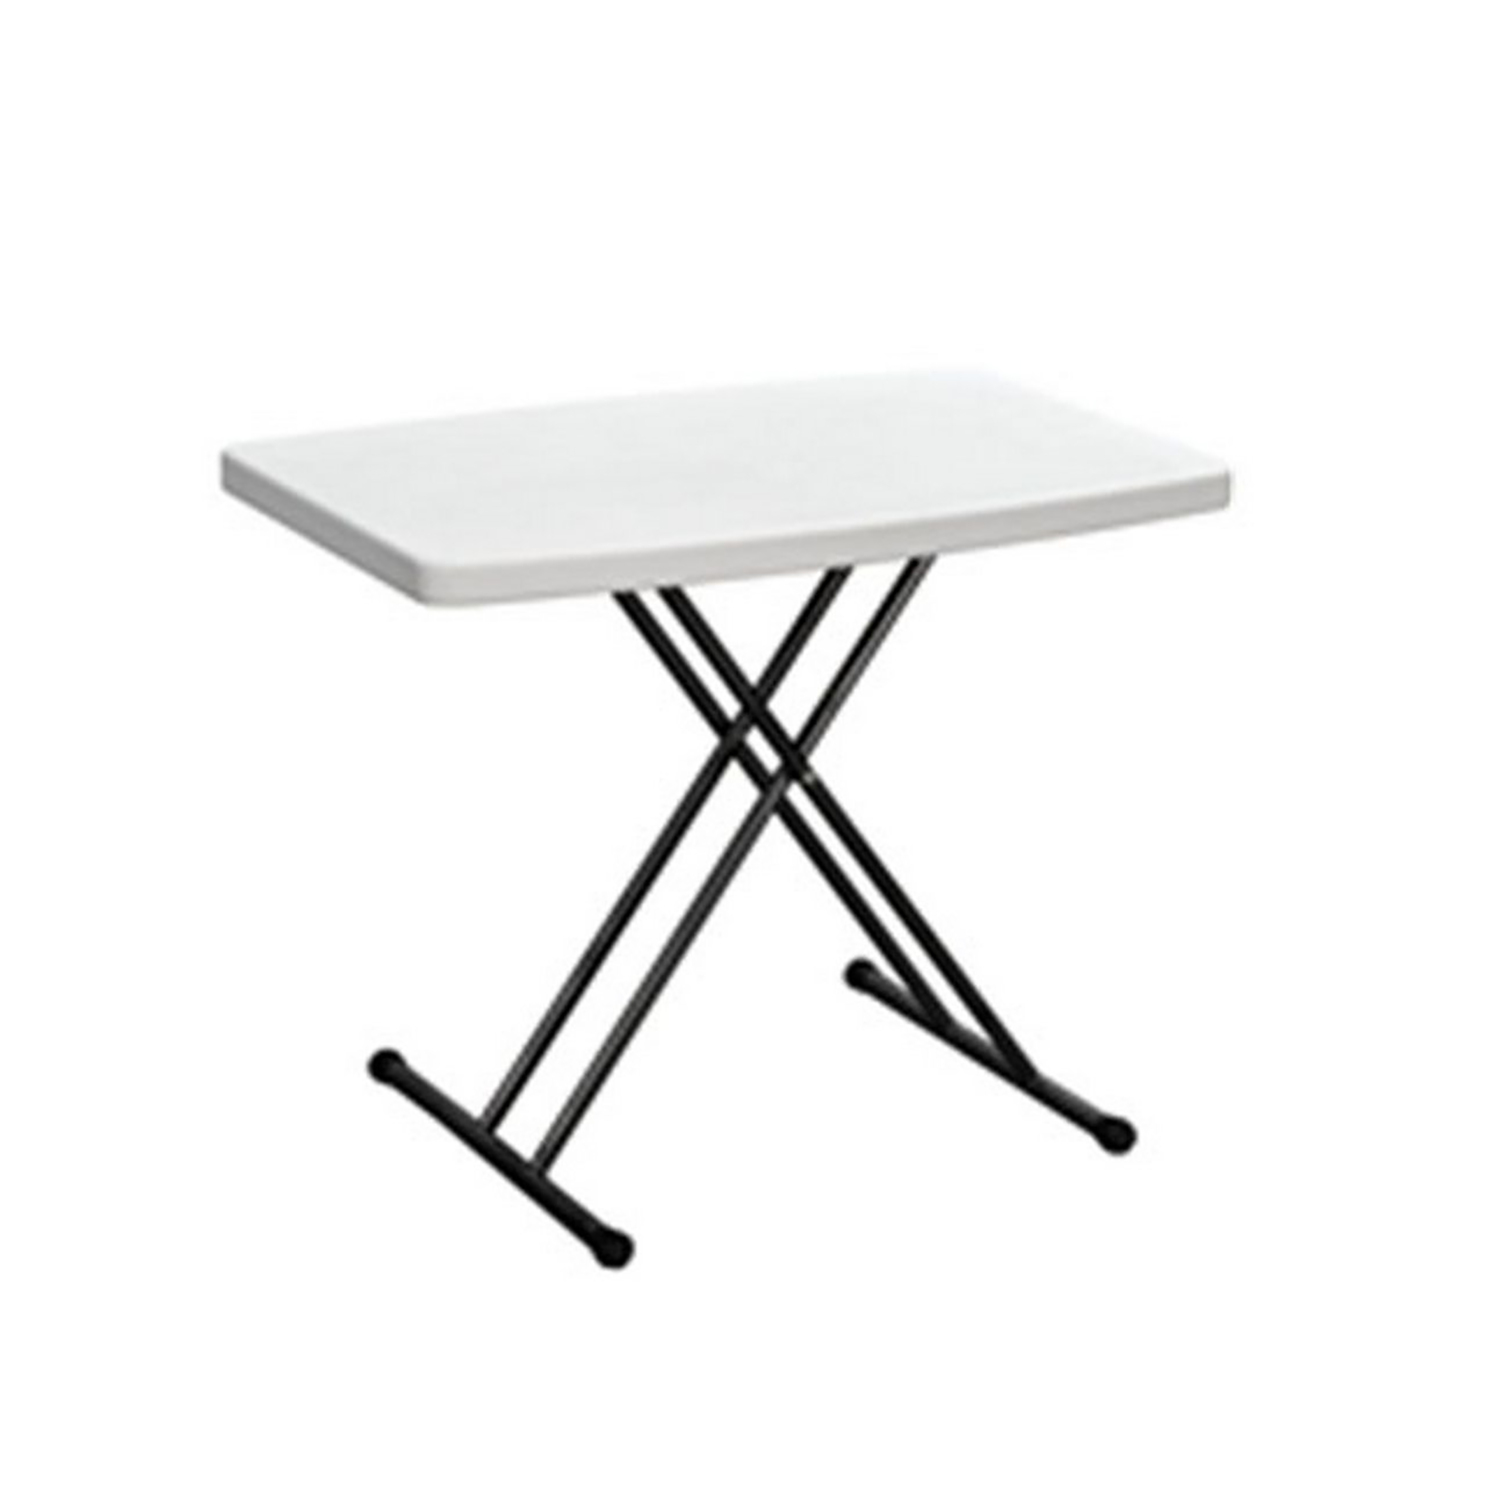 White and Black Folding Camping Table Image 1